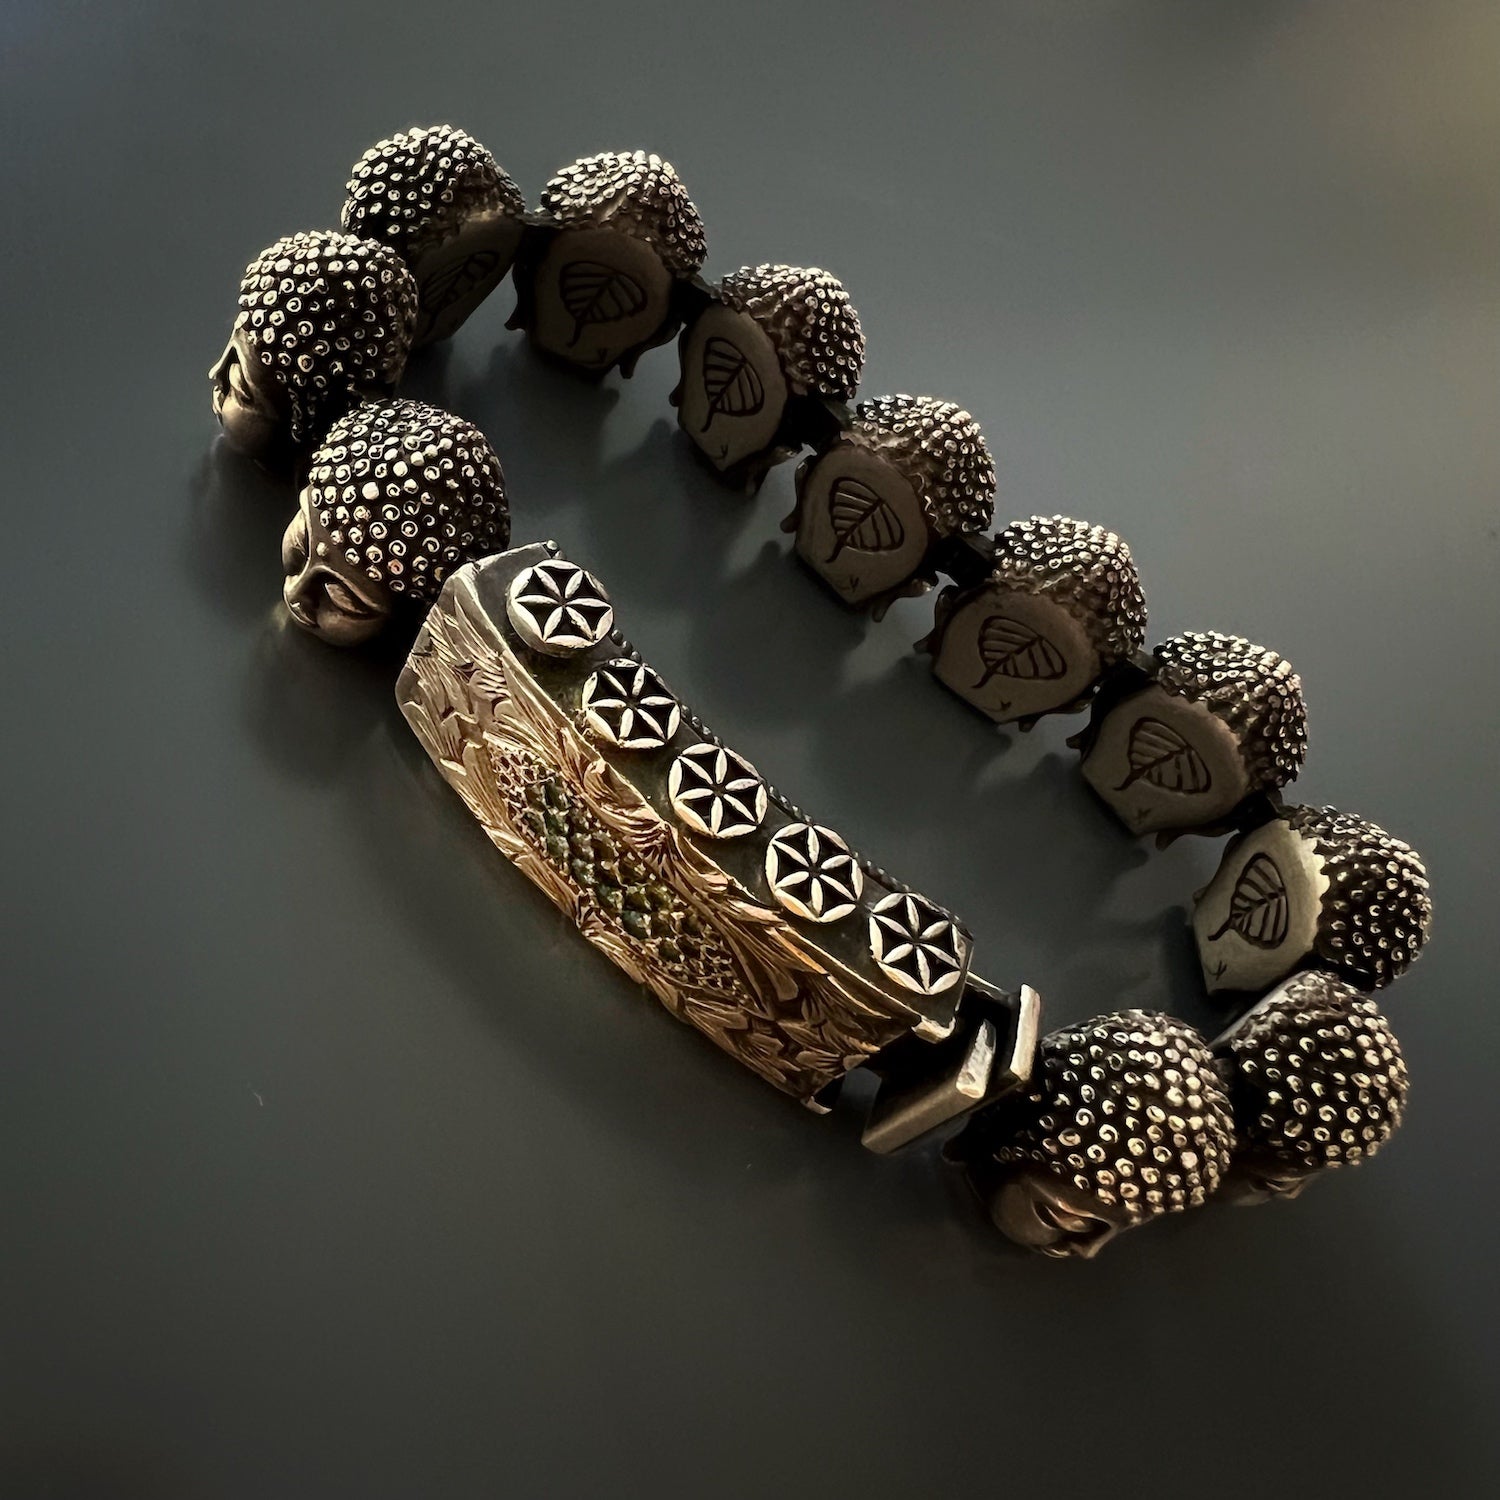 Custom Sizing Available - Contact us to personalize your Buddha Peace Bracelet.